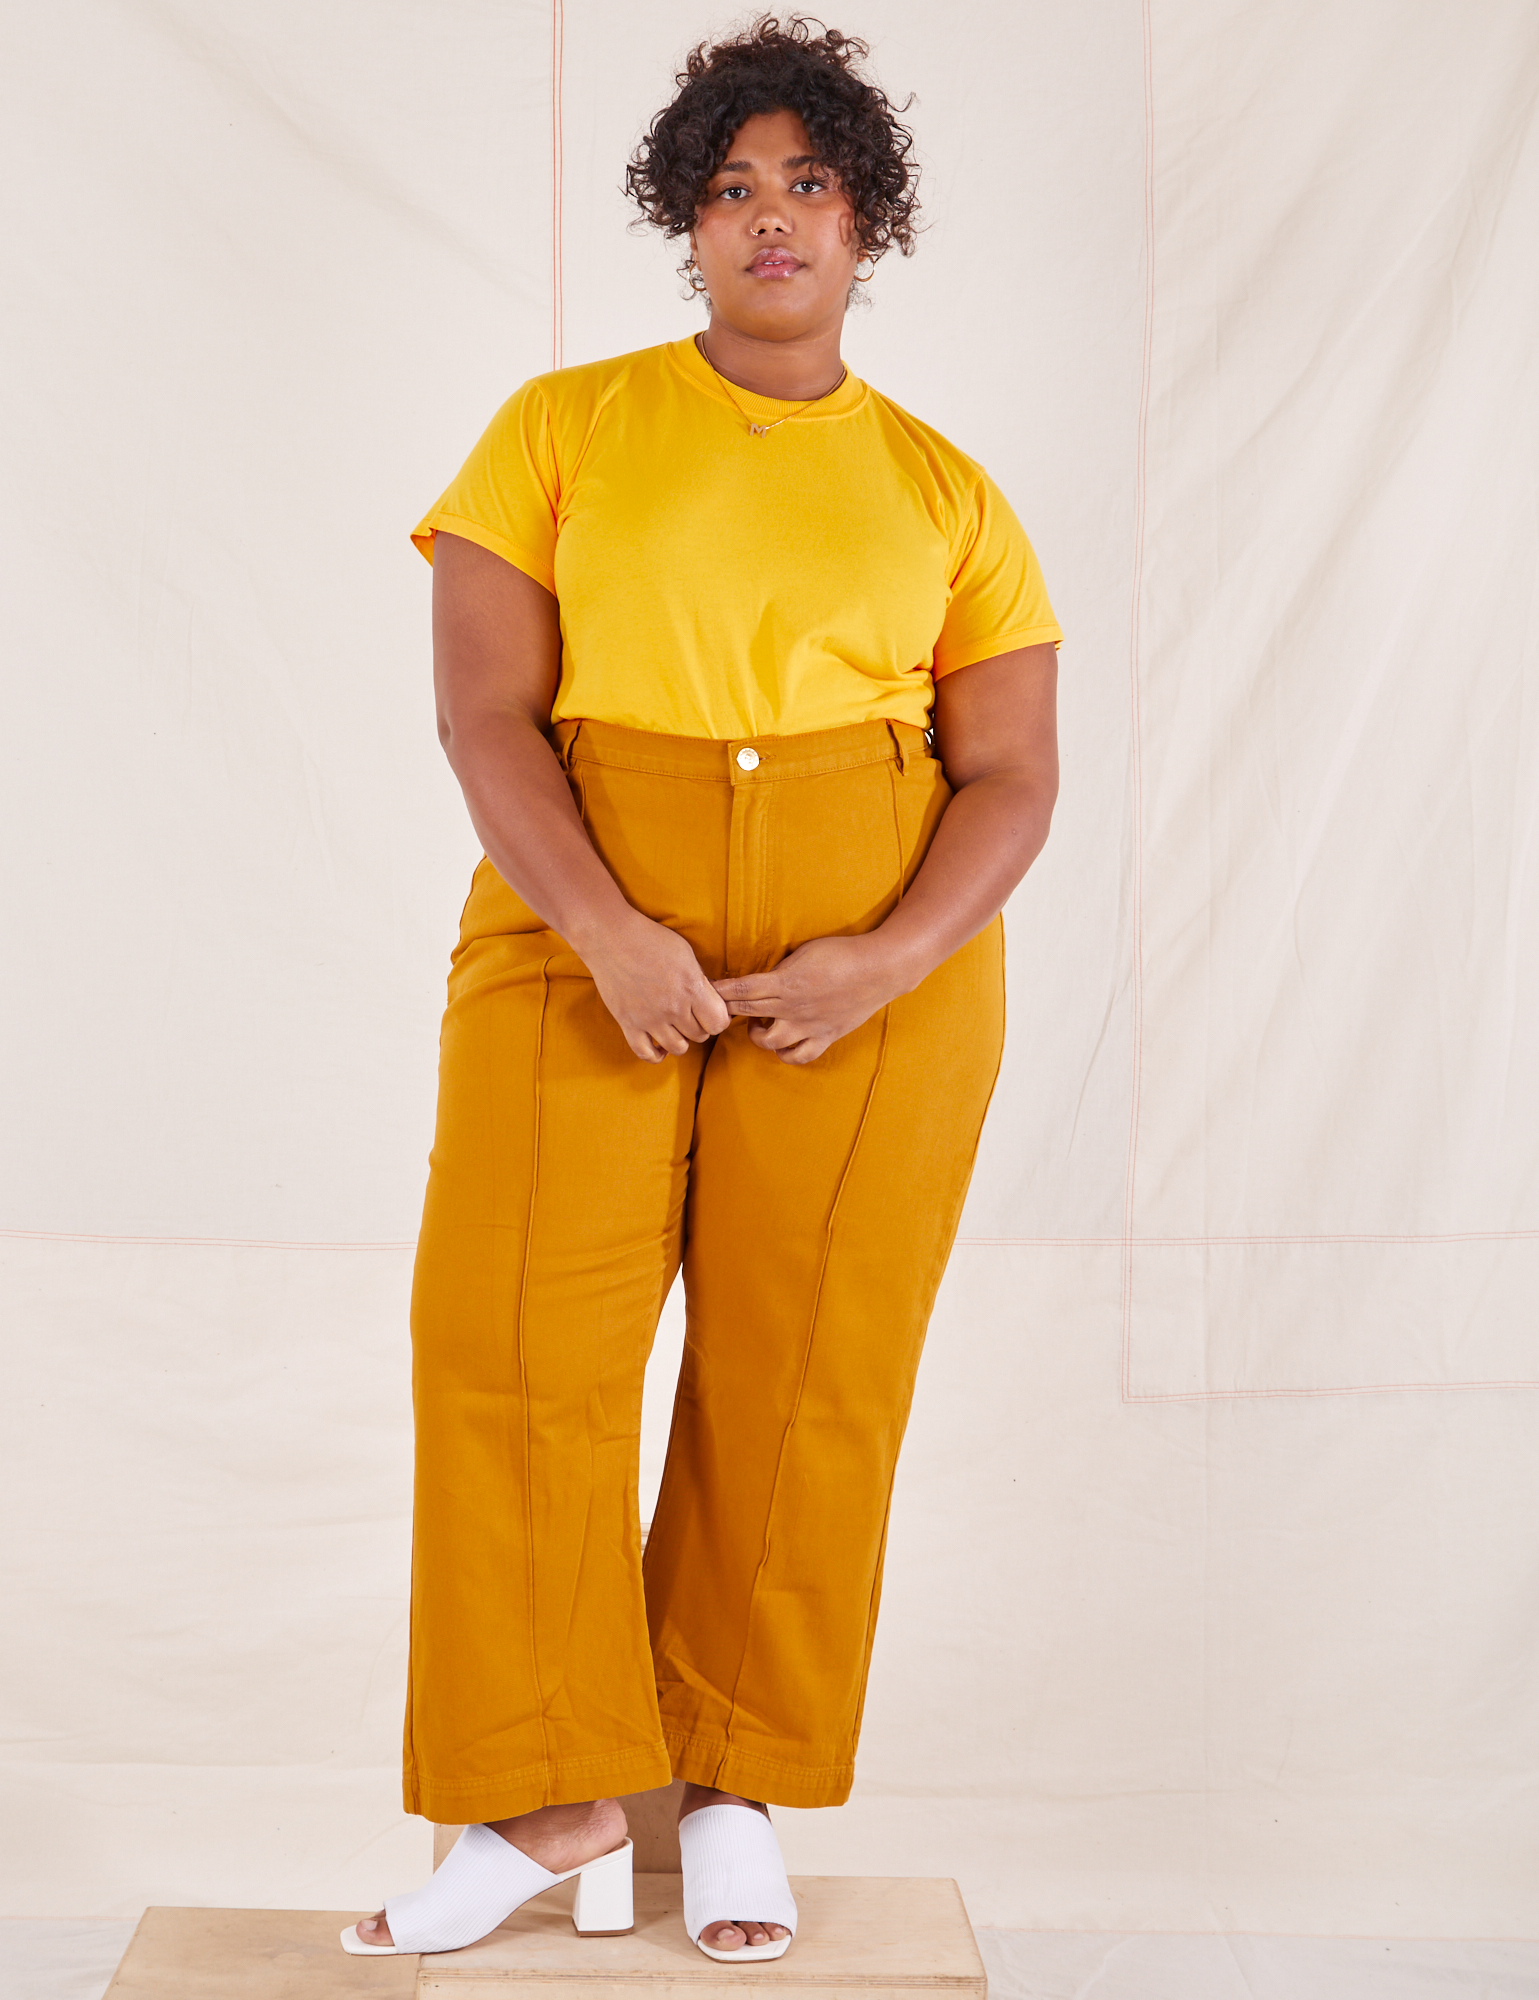 Morgan is wearing Organic Vintage Tee in Sunshine Yellow and spicy mustard Western Pants